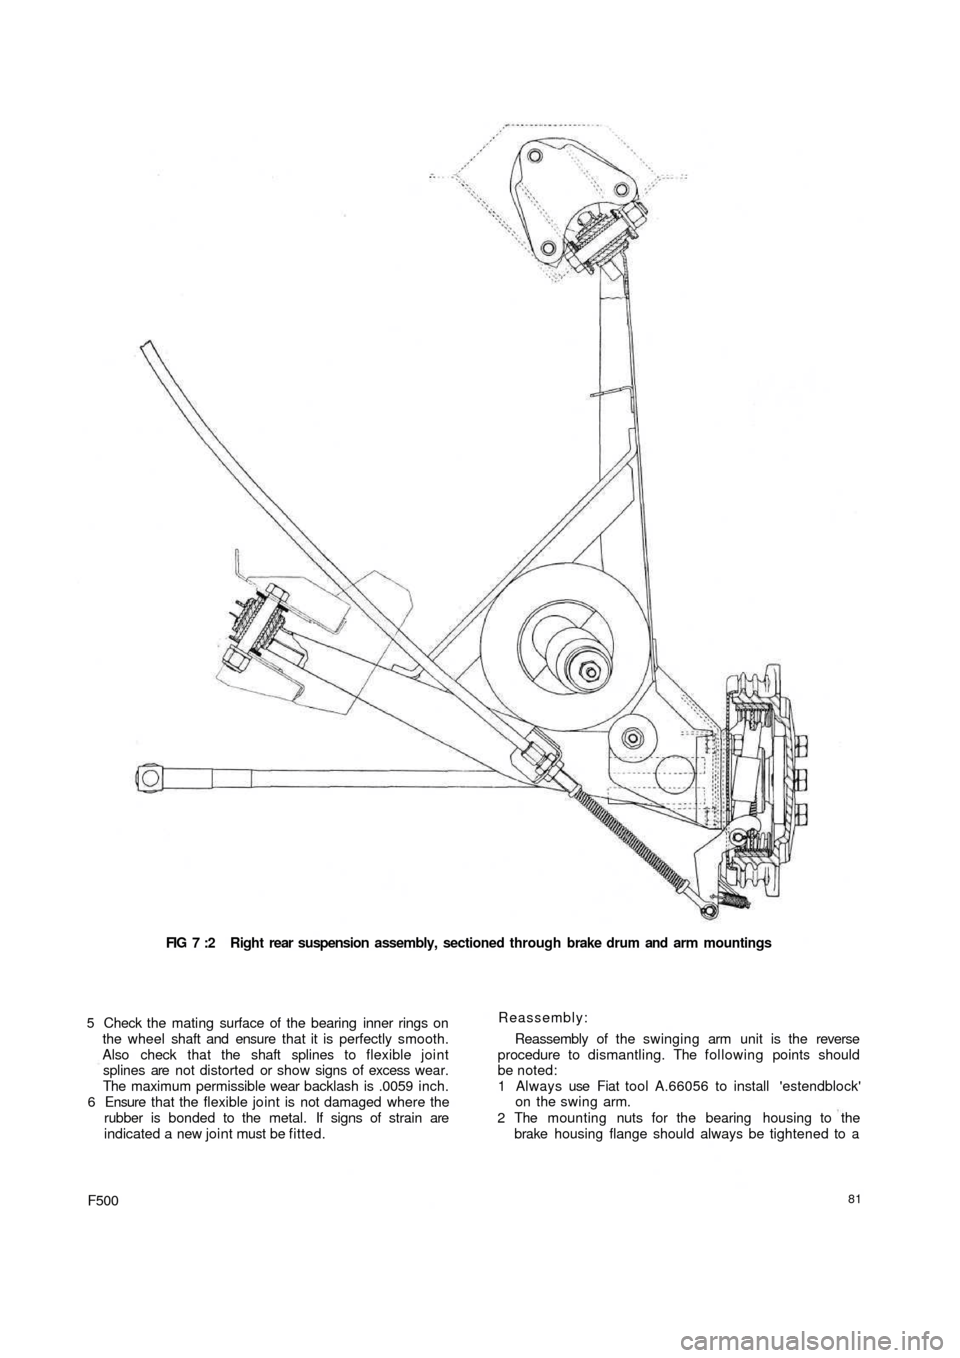 FIAT 500 1958 1.G Workshop Manual FIG 7 :2  Right rear suspension  assembly, sectioned through brake drum and arm mountings
5 Check the mating surface of the bearing inner rings on
the wheel shaft and ensure that it is perfectly smoot